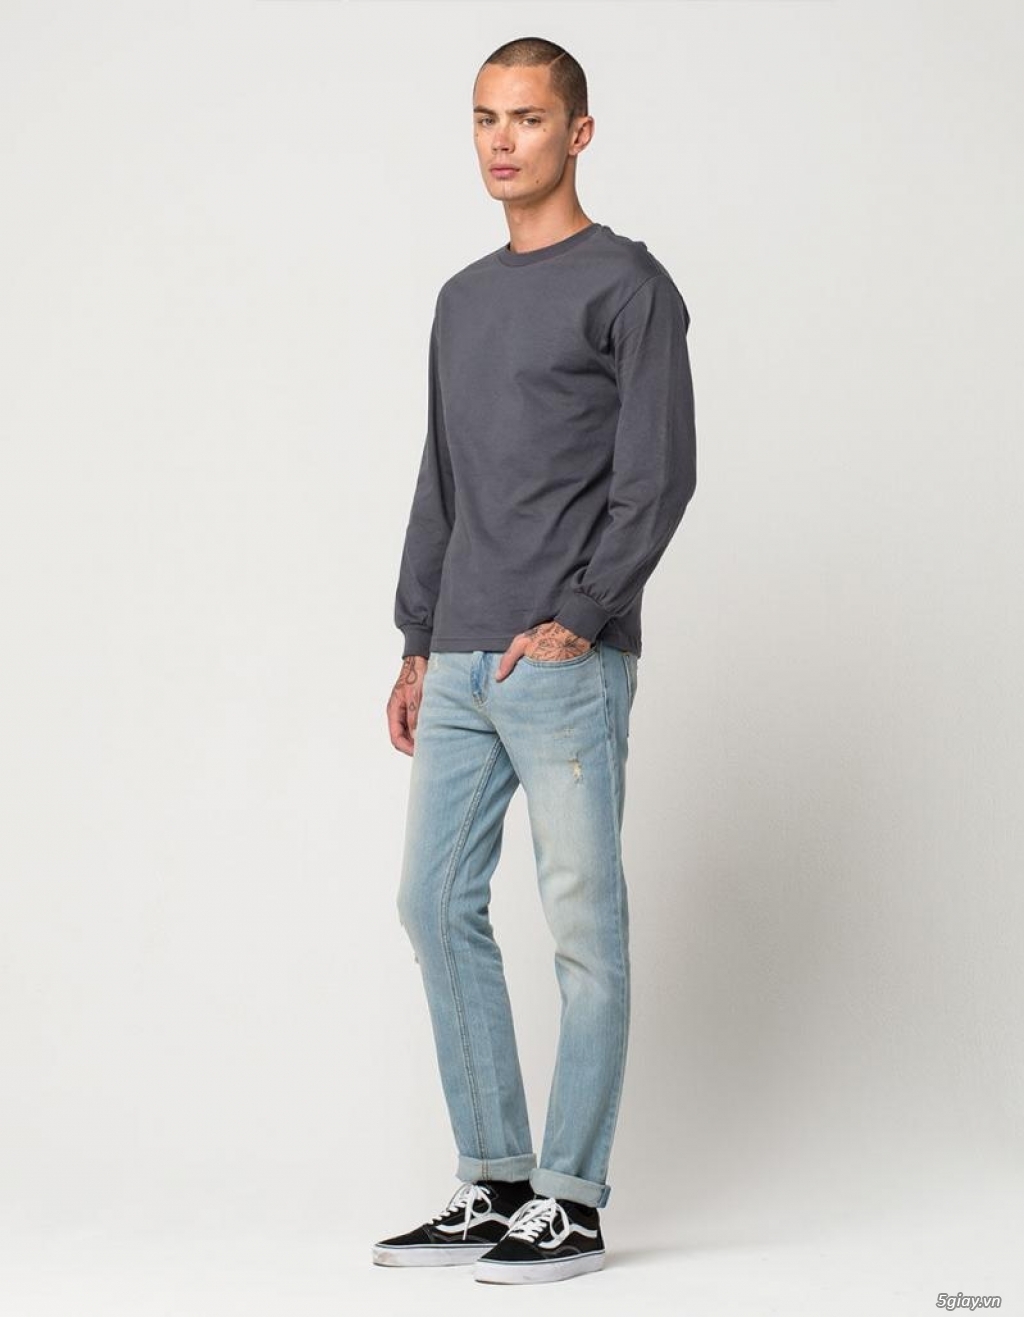 Rsq London Skinny Jeans End 22h5918/8/2019